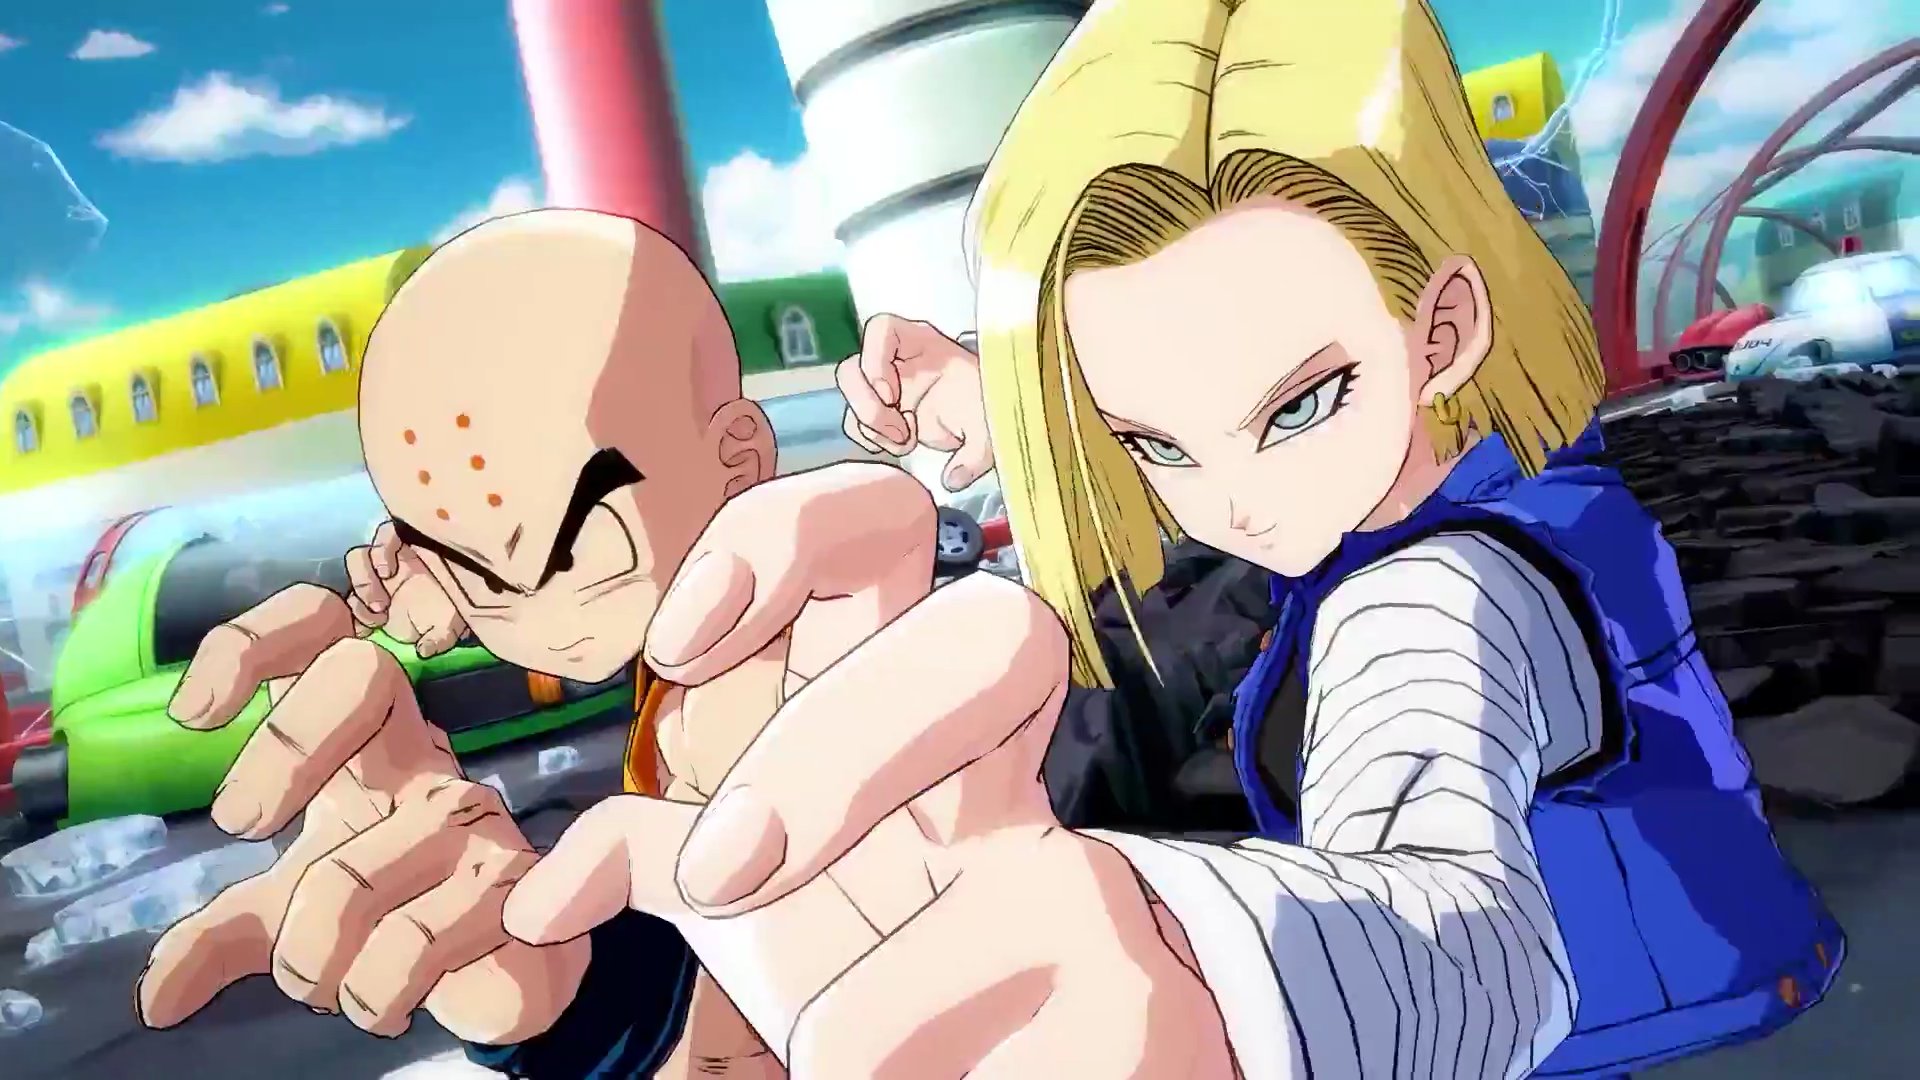 Why is there so much art of 18 cheating on Krillin